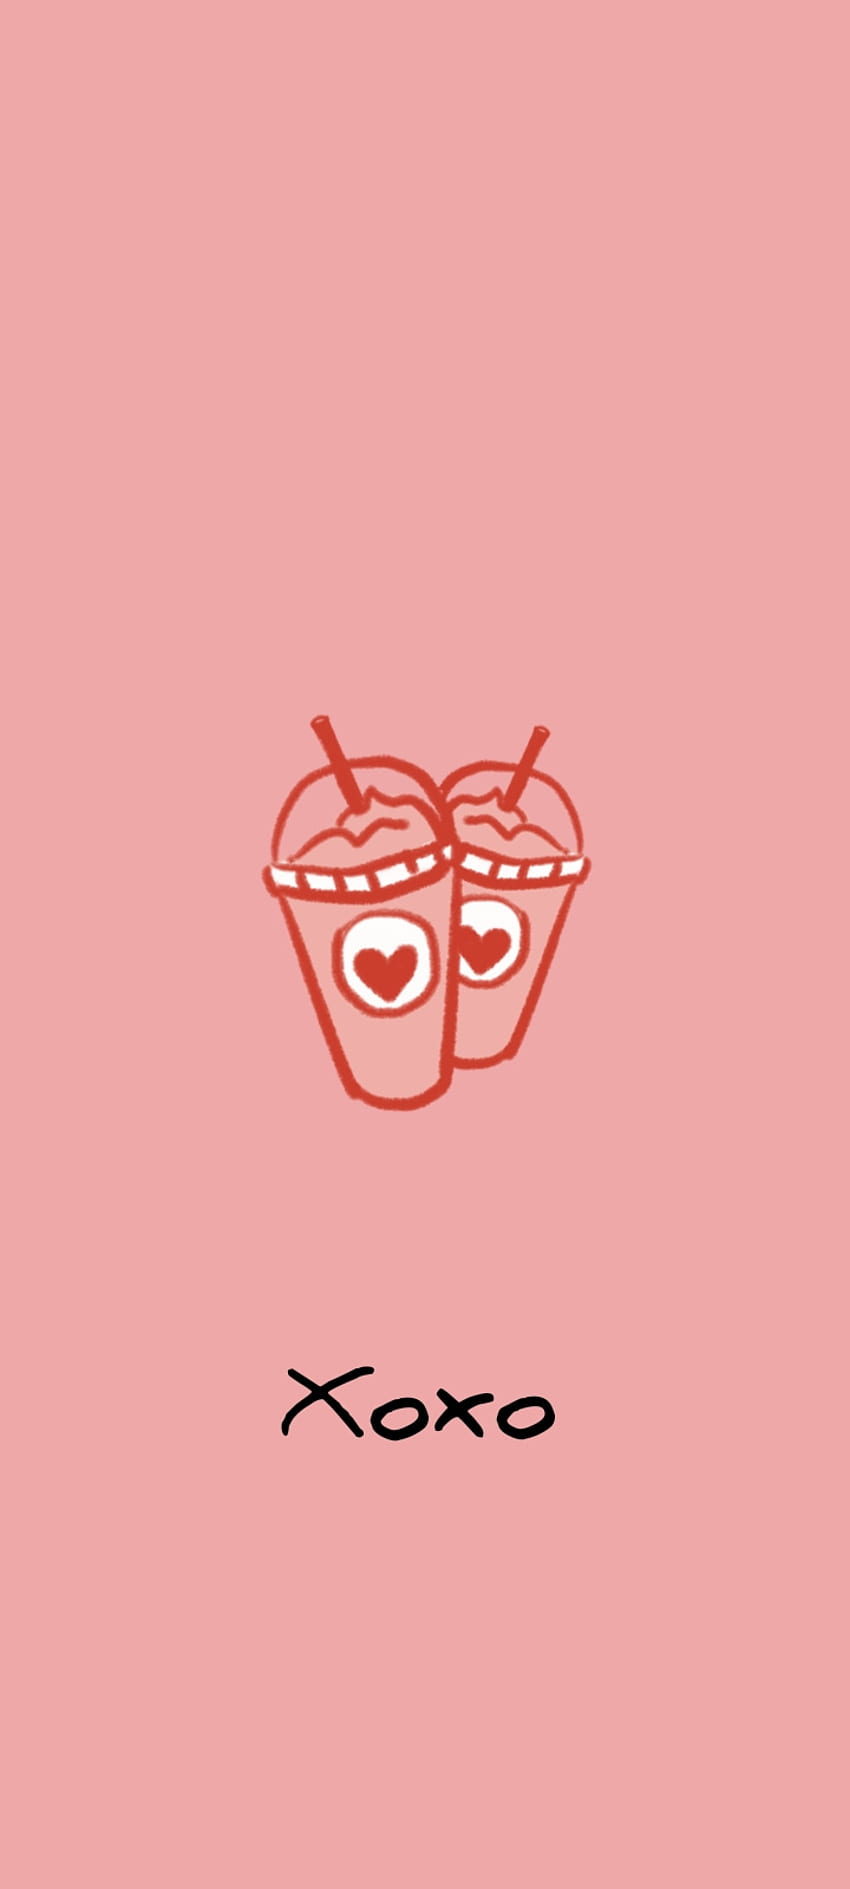 XOXO, wallpaper, background, HD, iPhone, Android, iPad, Cute | Ipad  background, Valentines wallpaper, Iphone wallpaper